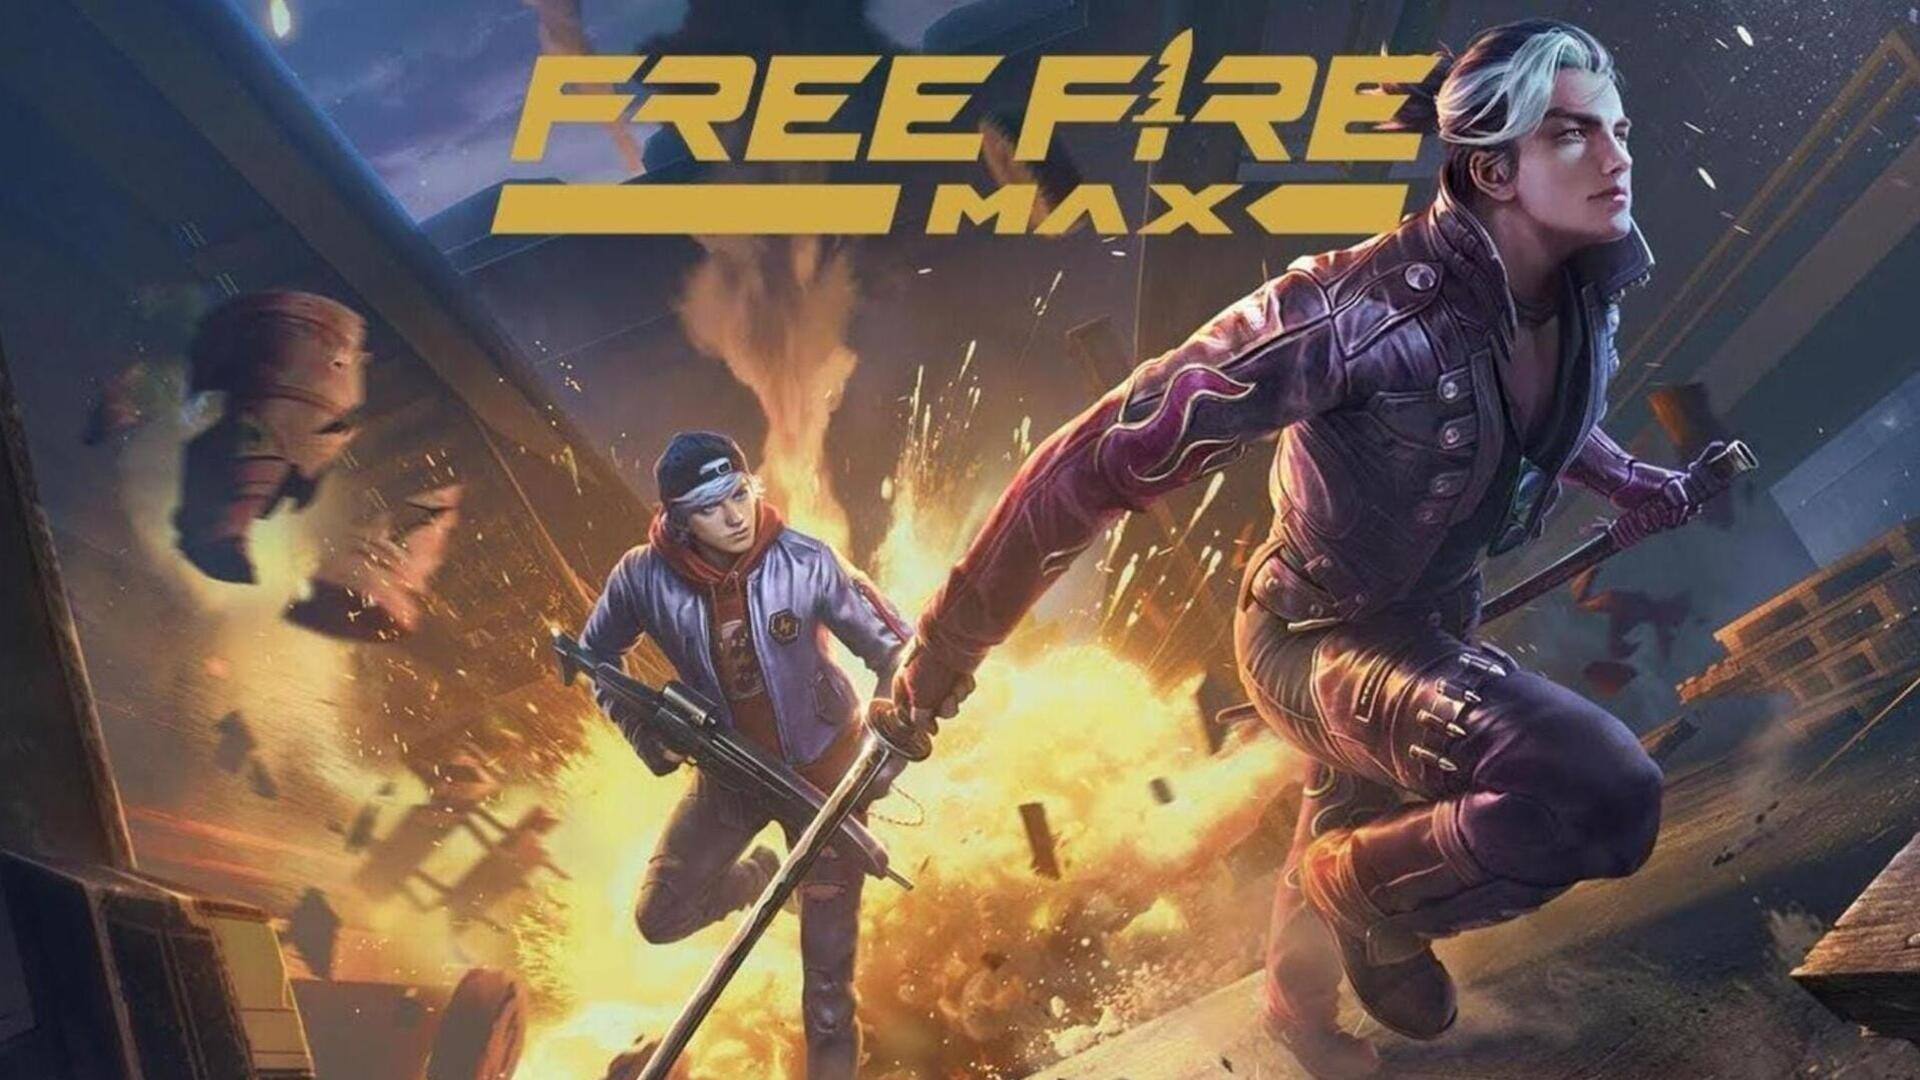 Garena Free Fire MAX codes for December 1: Redeem now